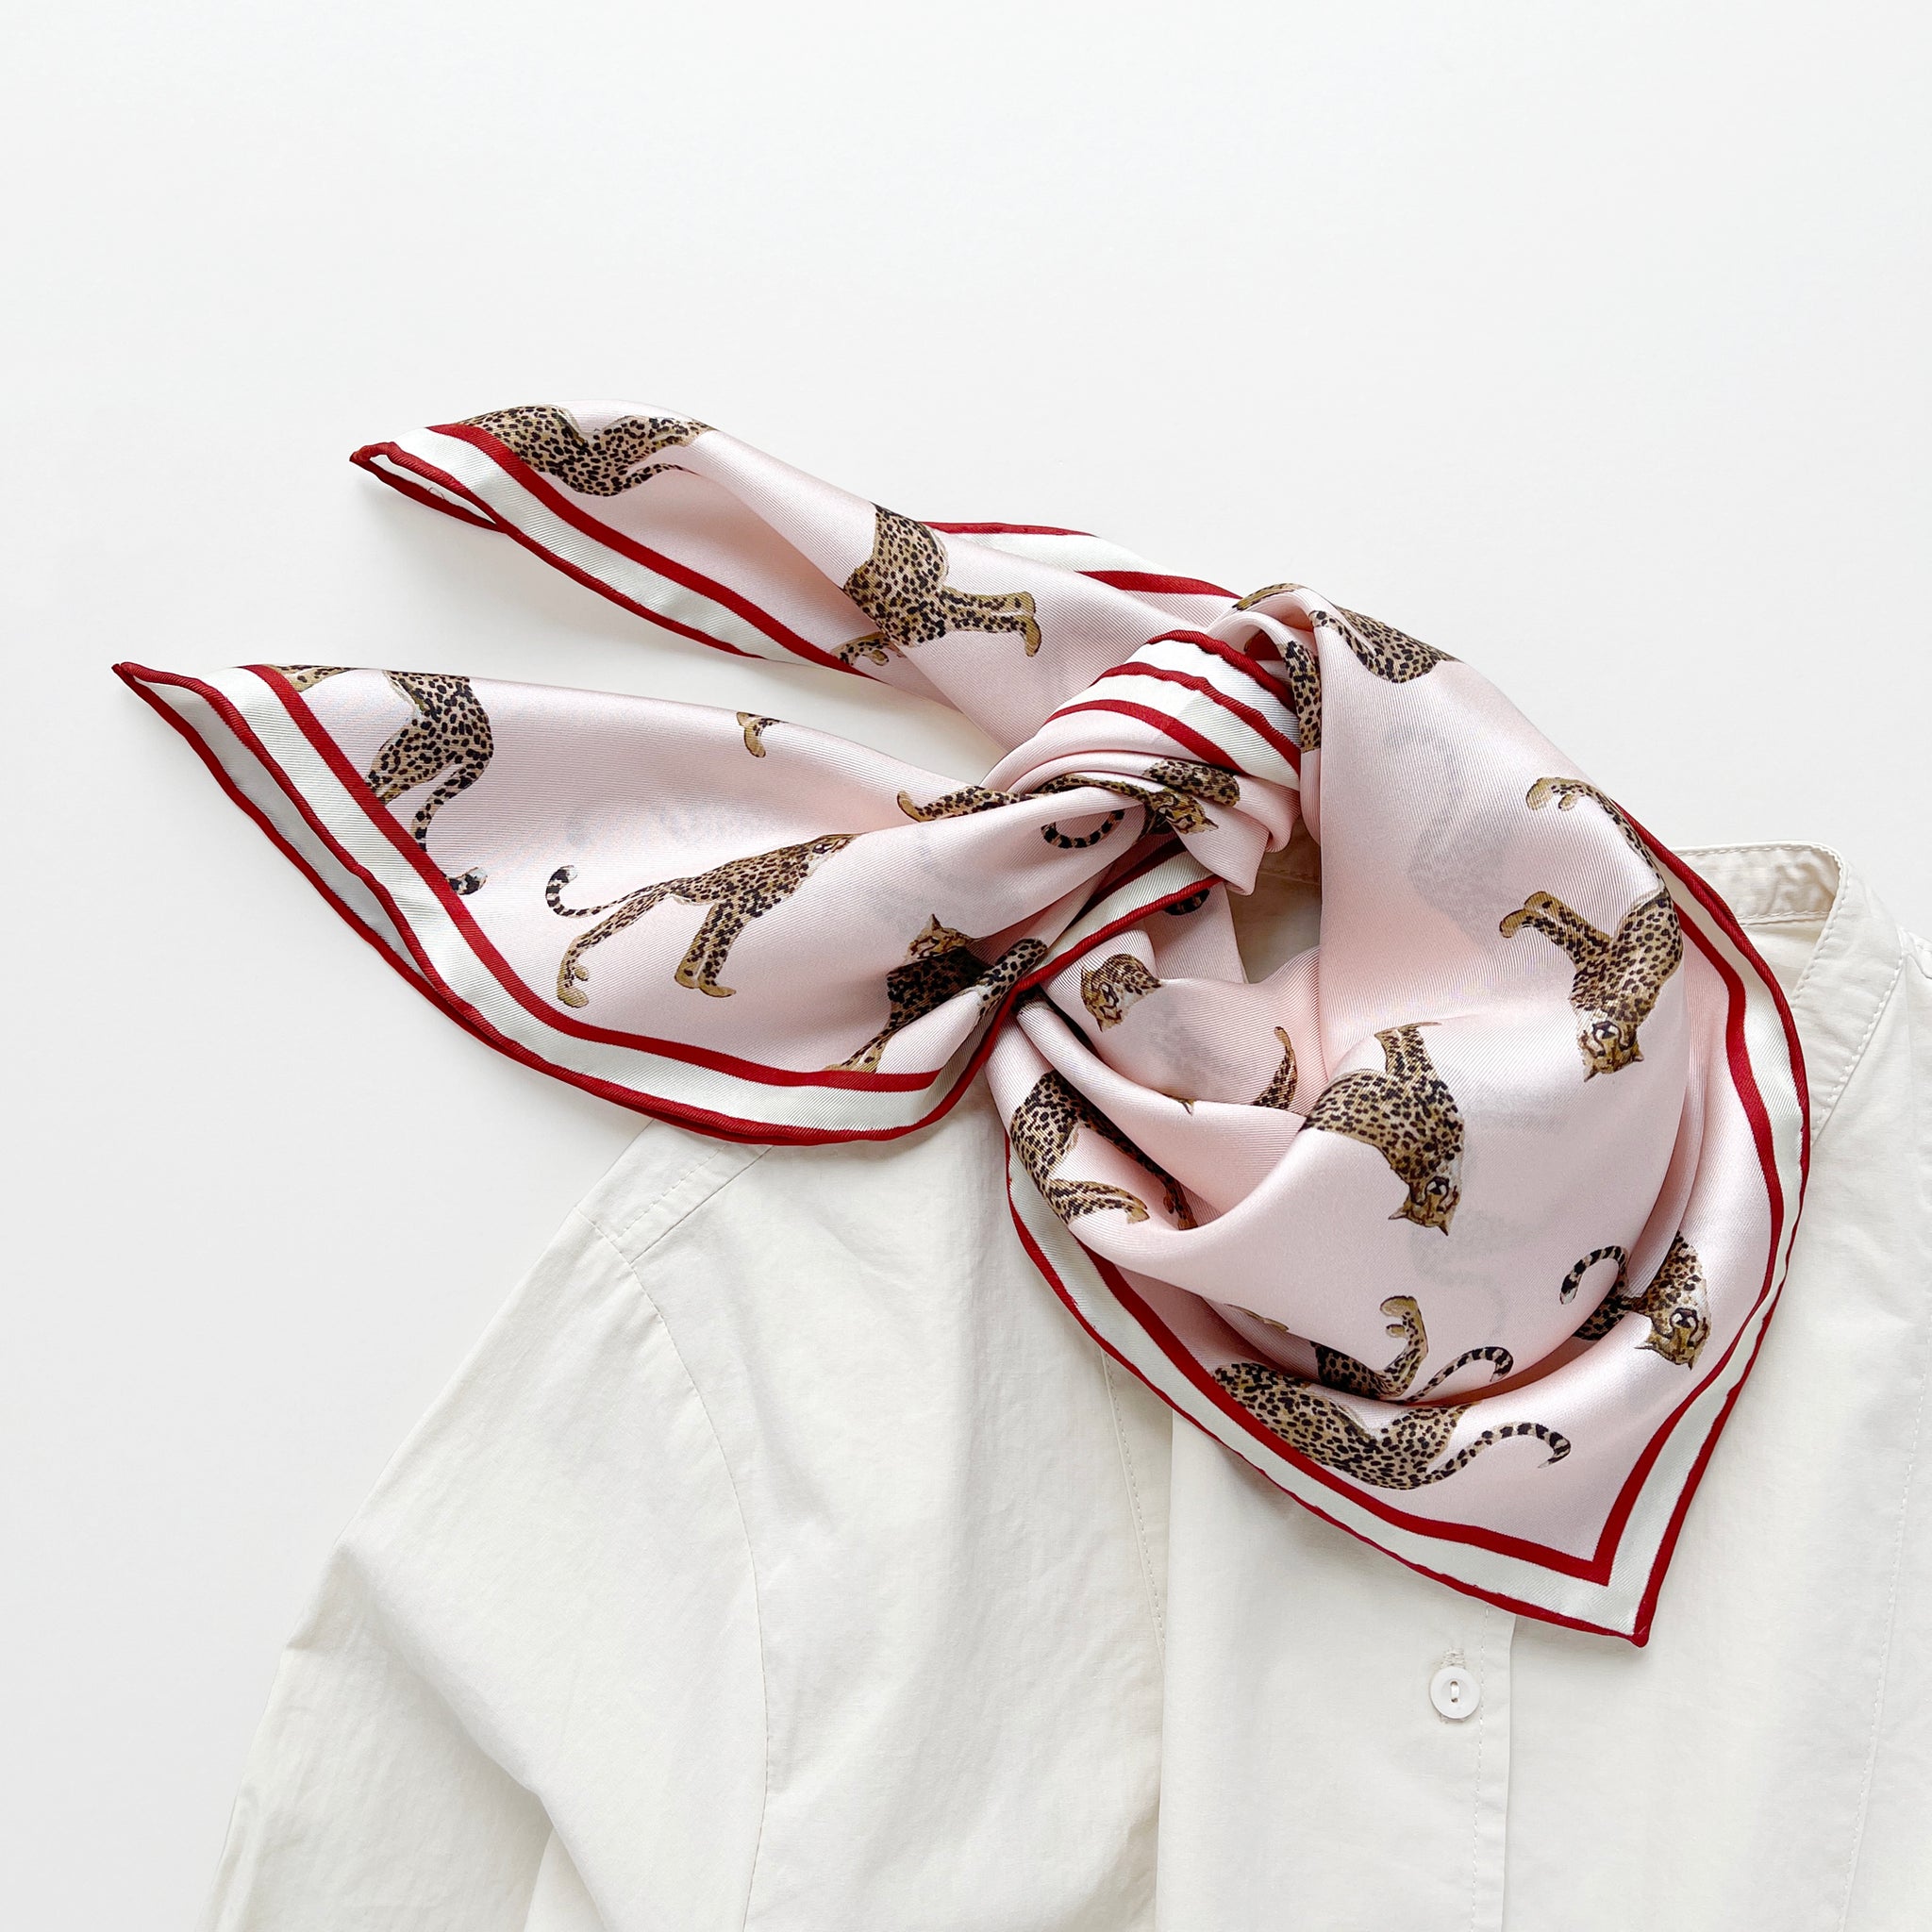 a pink base silk scarf featuring leopard print with red hand-rolled edges, knotted as a neck scarf, paired with a light beige women's shirt